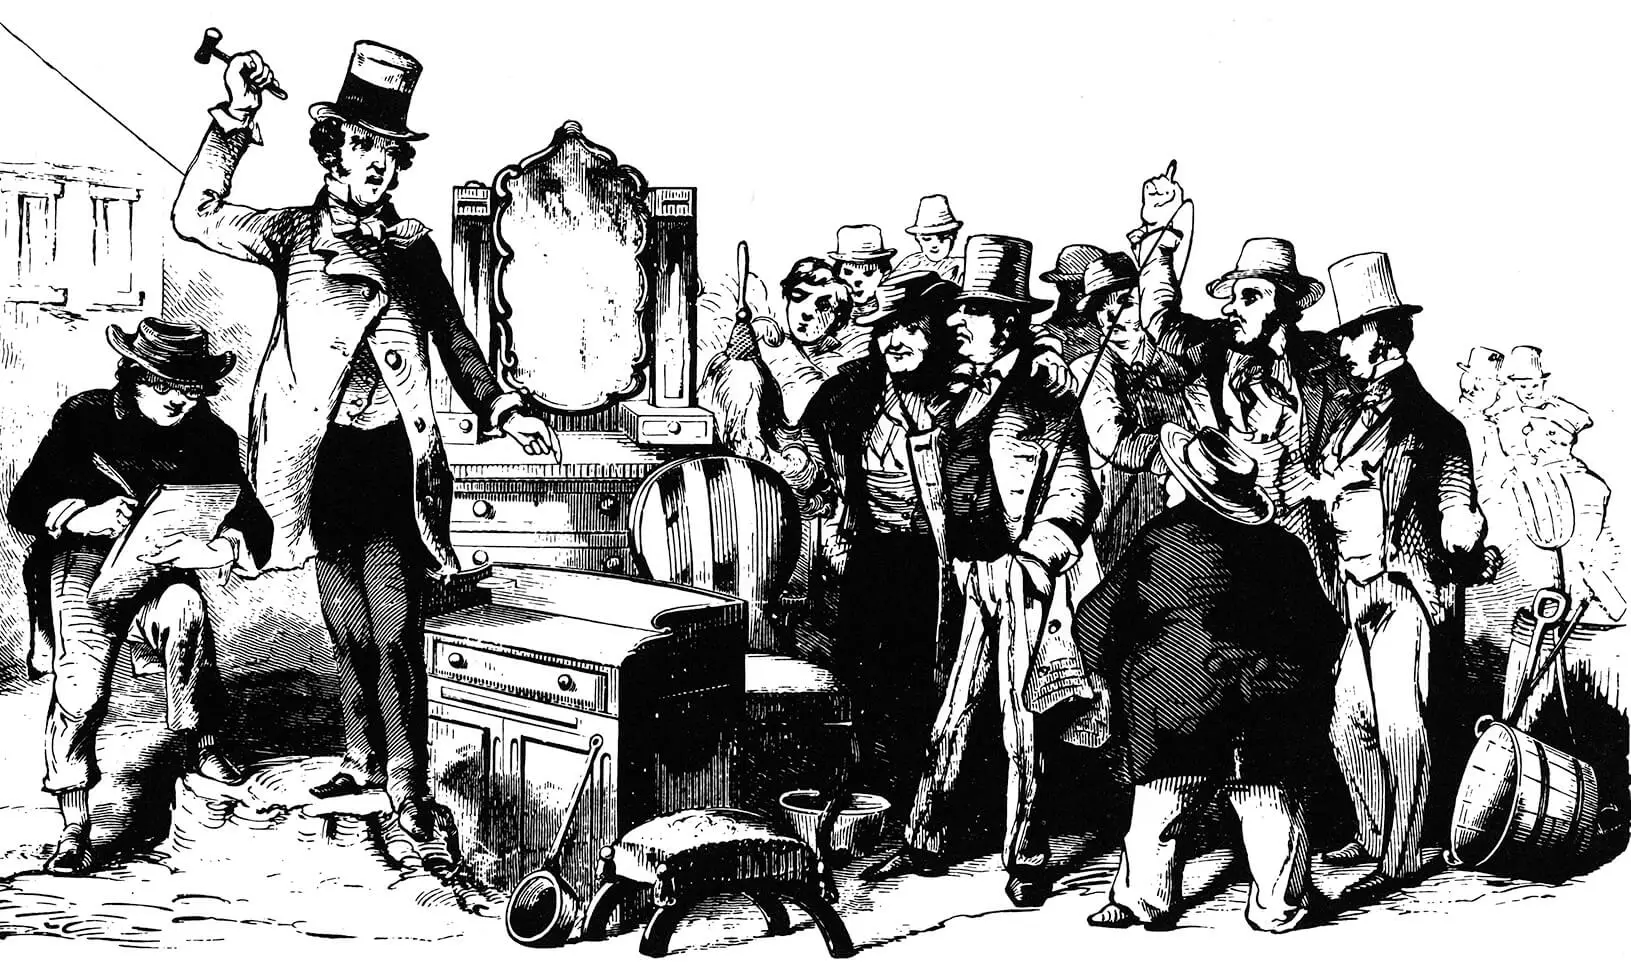 A political cartoon depicts a man auctioning off several household items and furniture to a crowd of eager men.